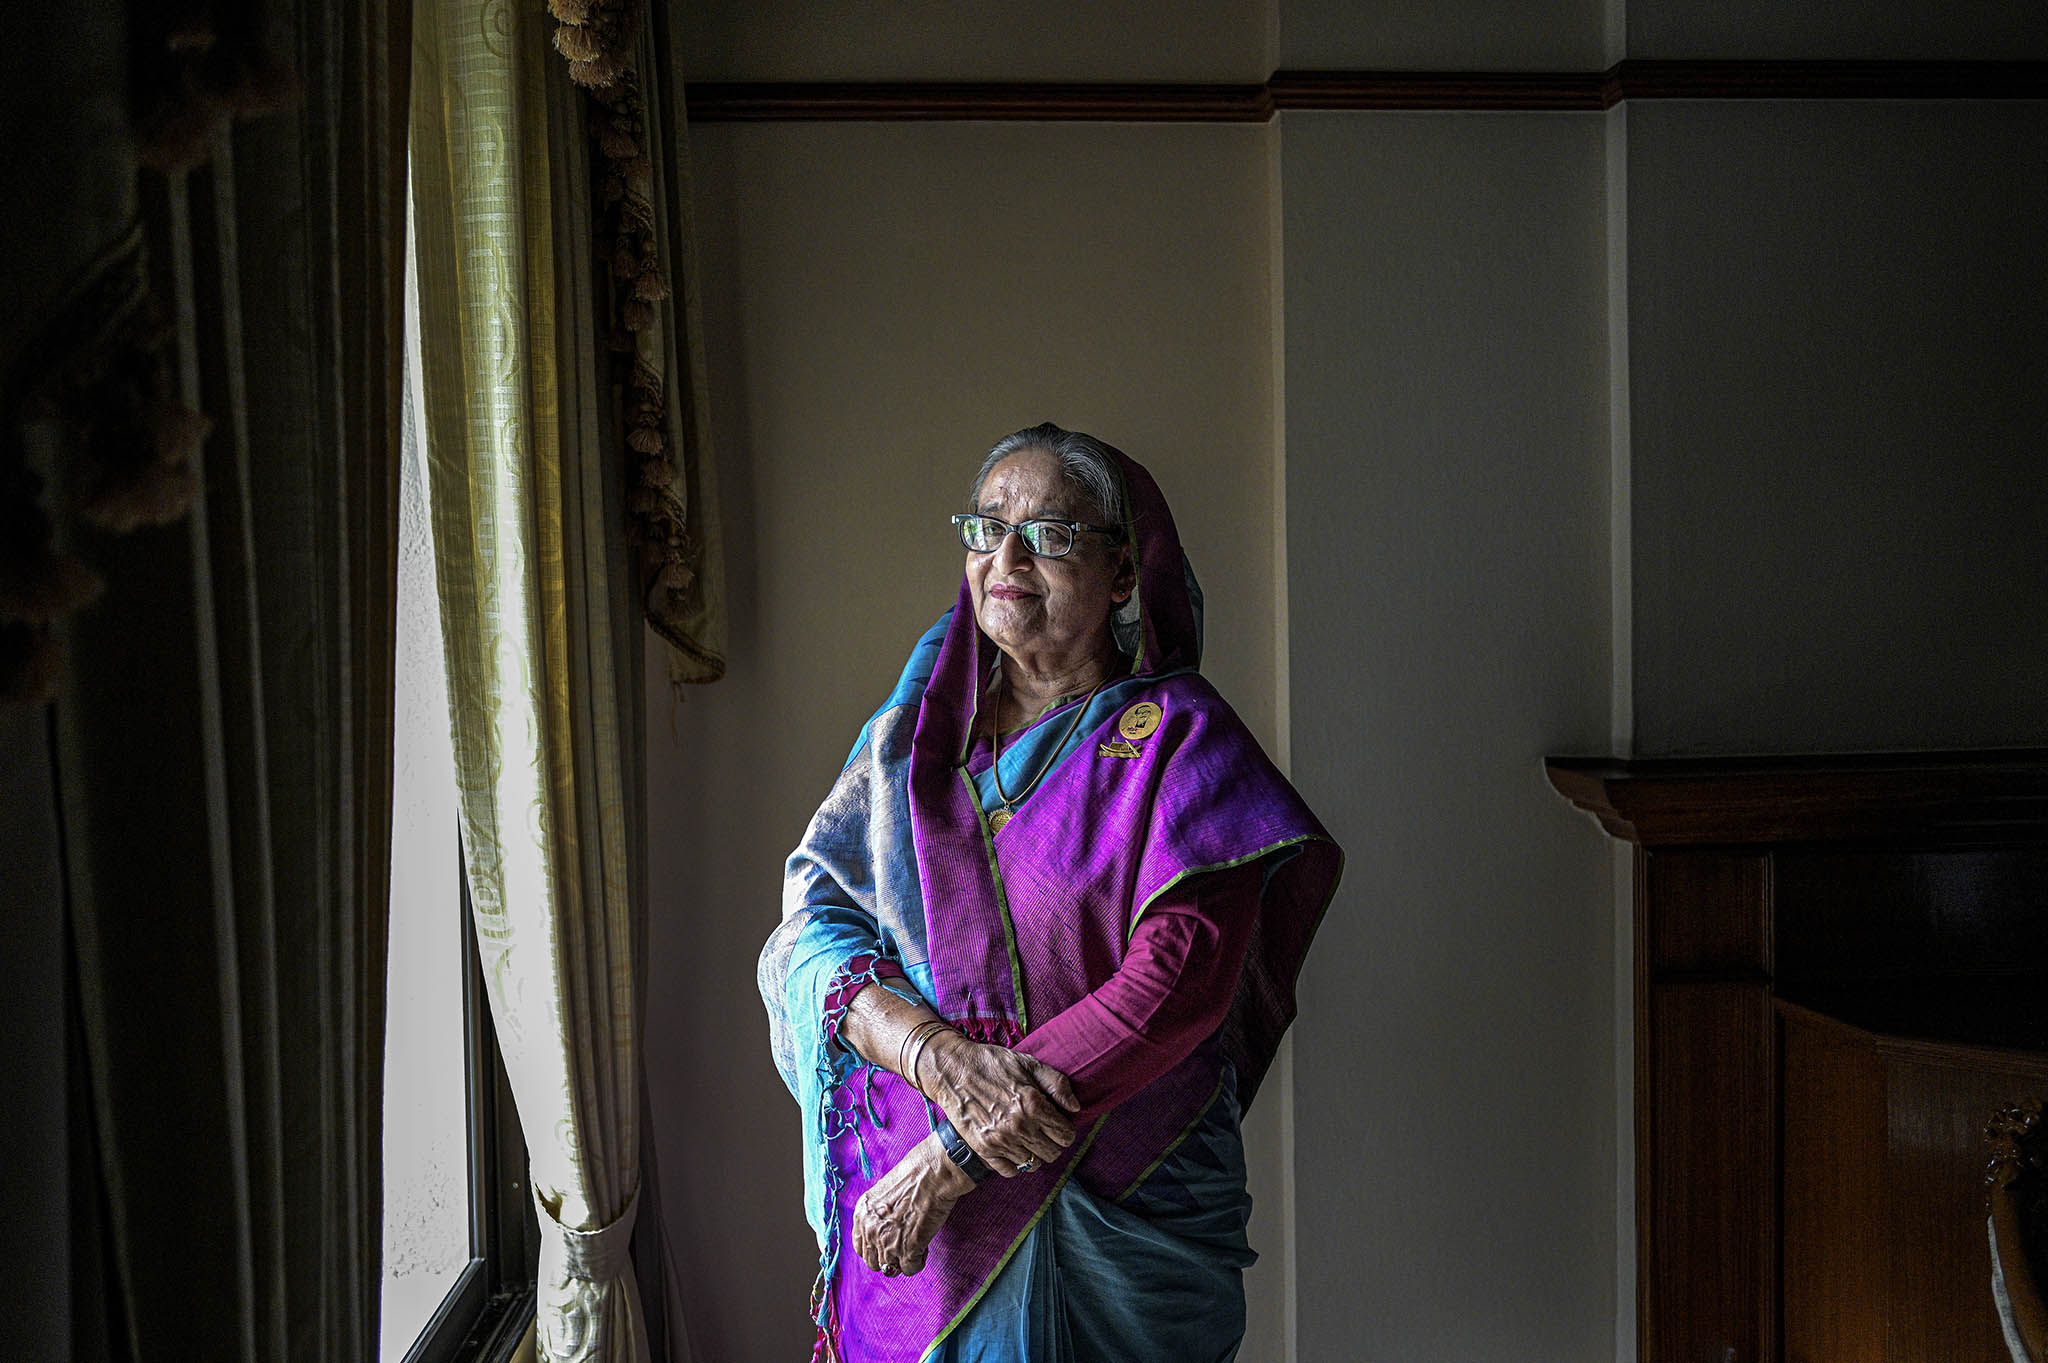 Bangladeshi Prime Minister Sheikh Hasina has waged a campaign of political consolidation whose goal, opposition leaders, analysts and activists say, is to turn the South Asian nation into a one-party state. (Atul Loke/The New York Times)